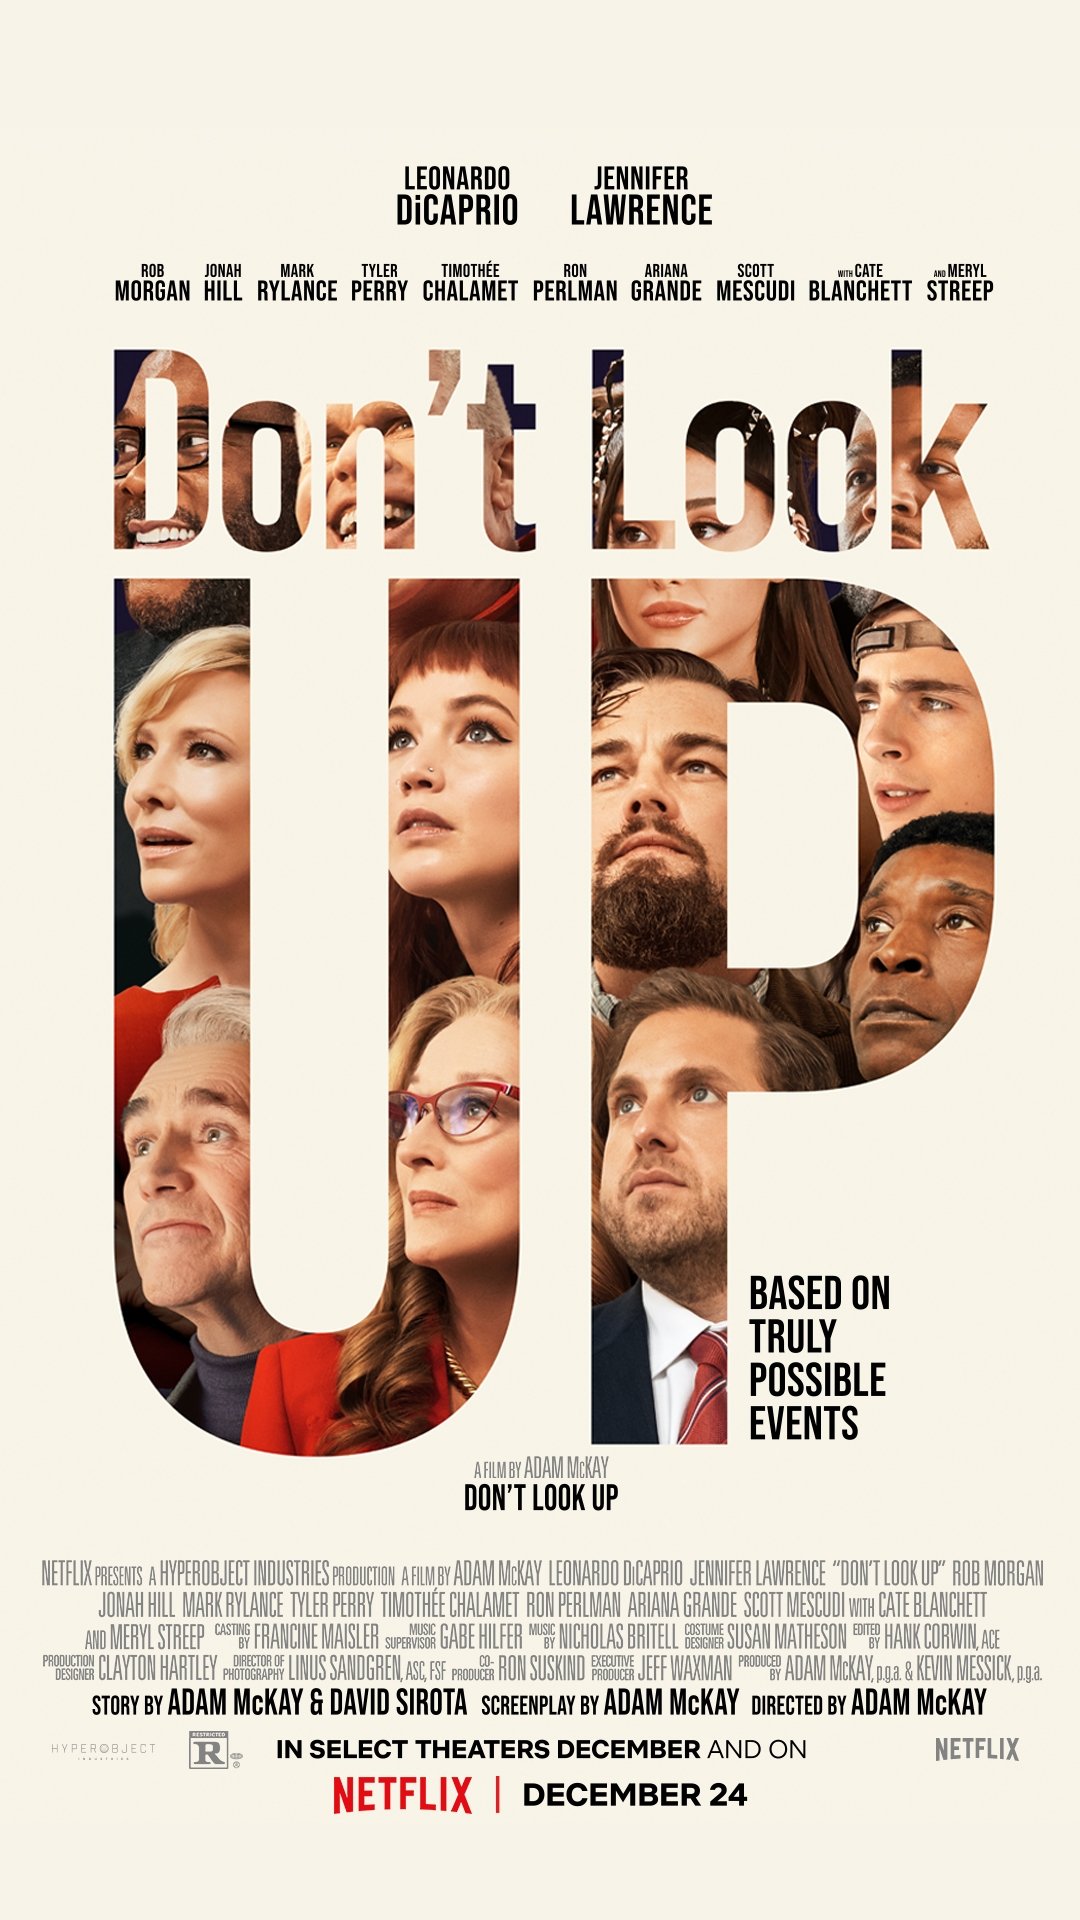 The official poster for 'Don't Look Up.'